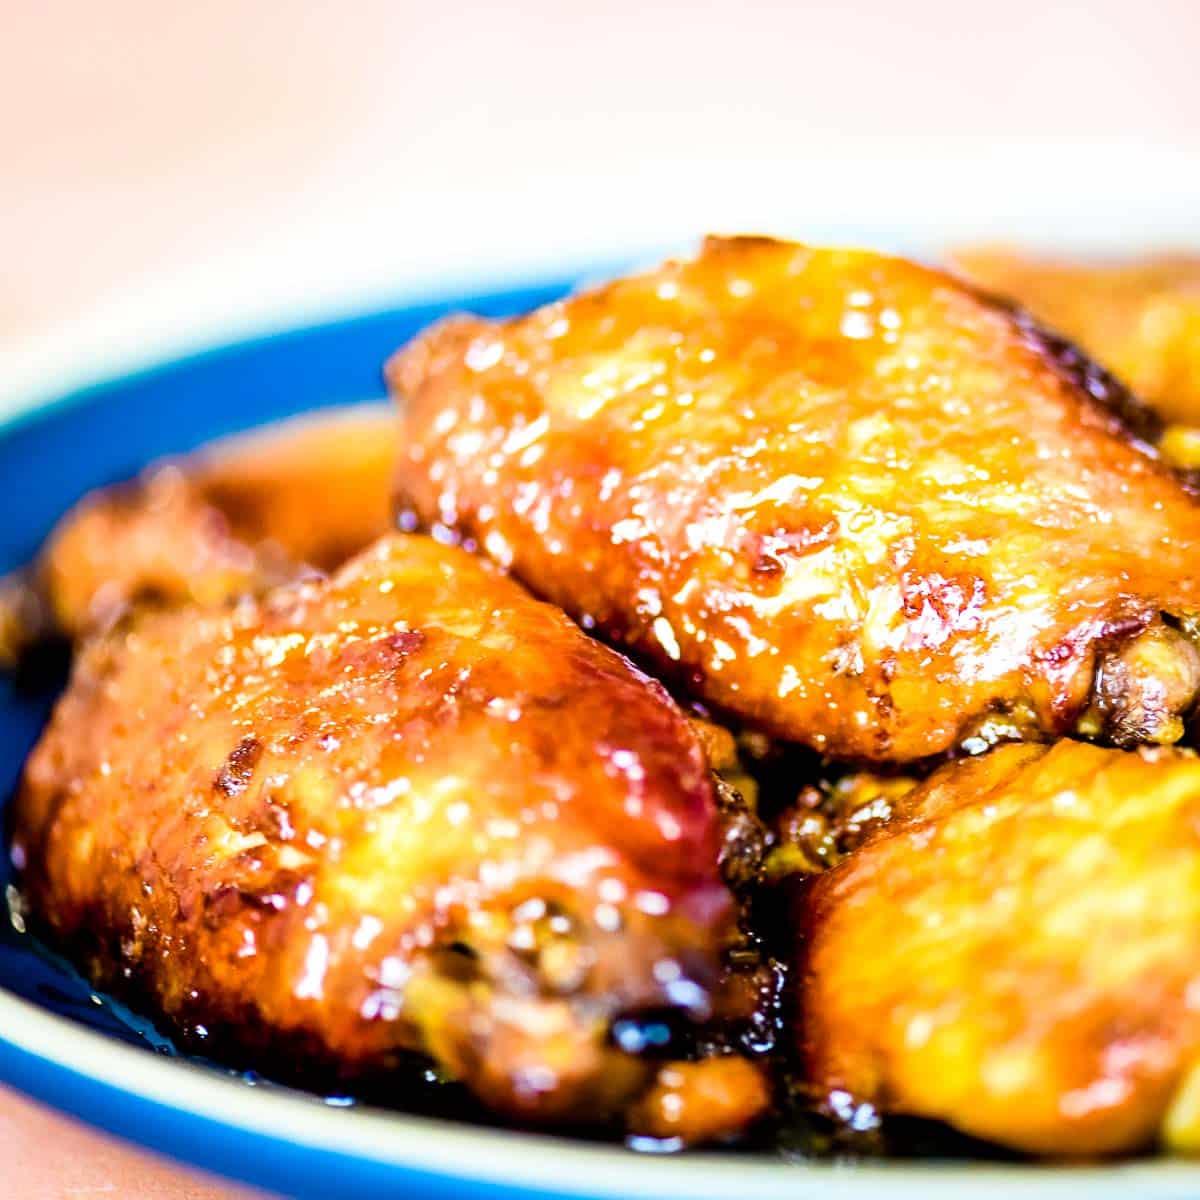 A closeup side view shot of soy garlic wings on a blue plate.